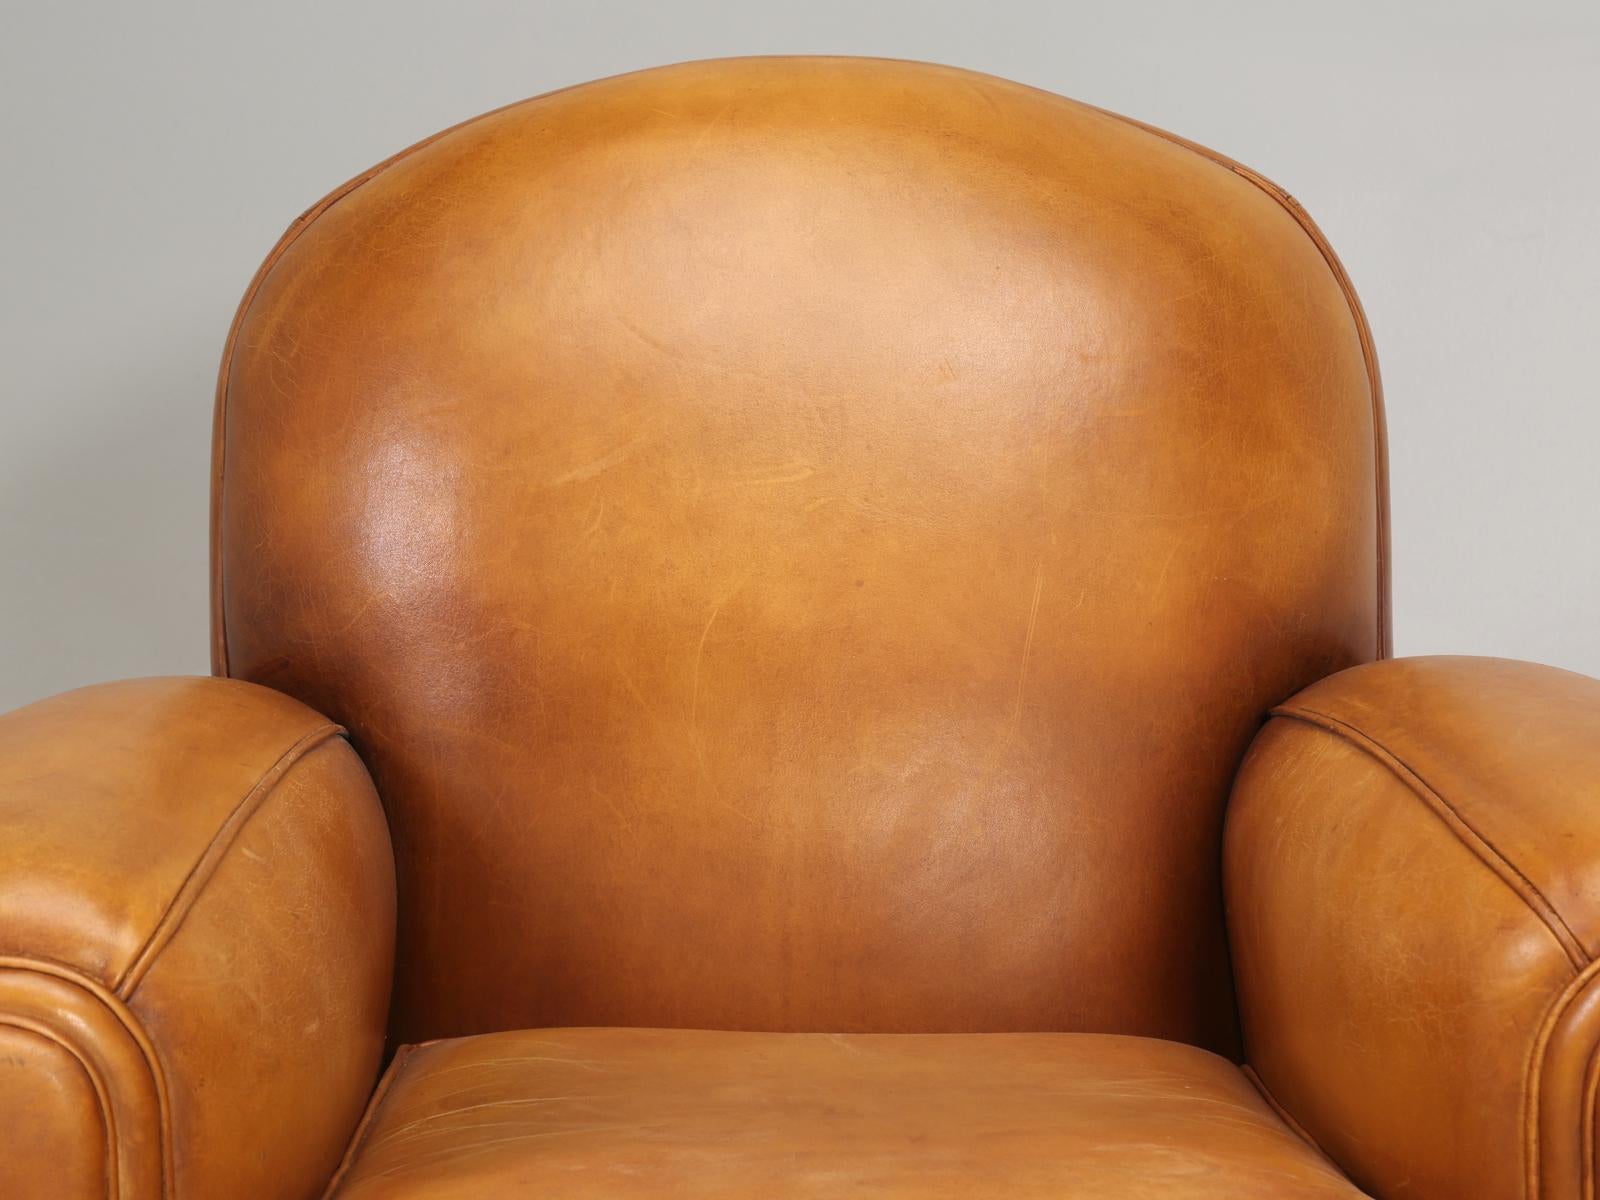 French leather club chairs in the Classic Art Deco style, that are in the finest, “all original leather” condition that we have seen in over 25-years. We began shopping for French leather club chairs over 30-years ago and finding a pair this